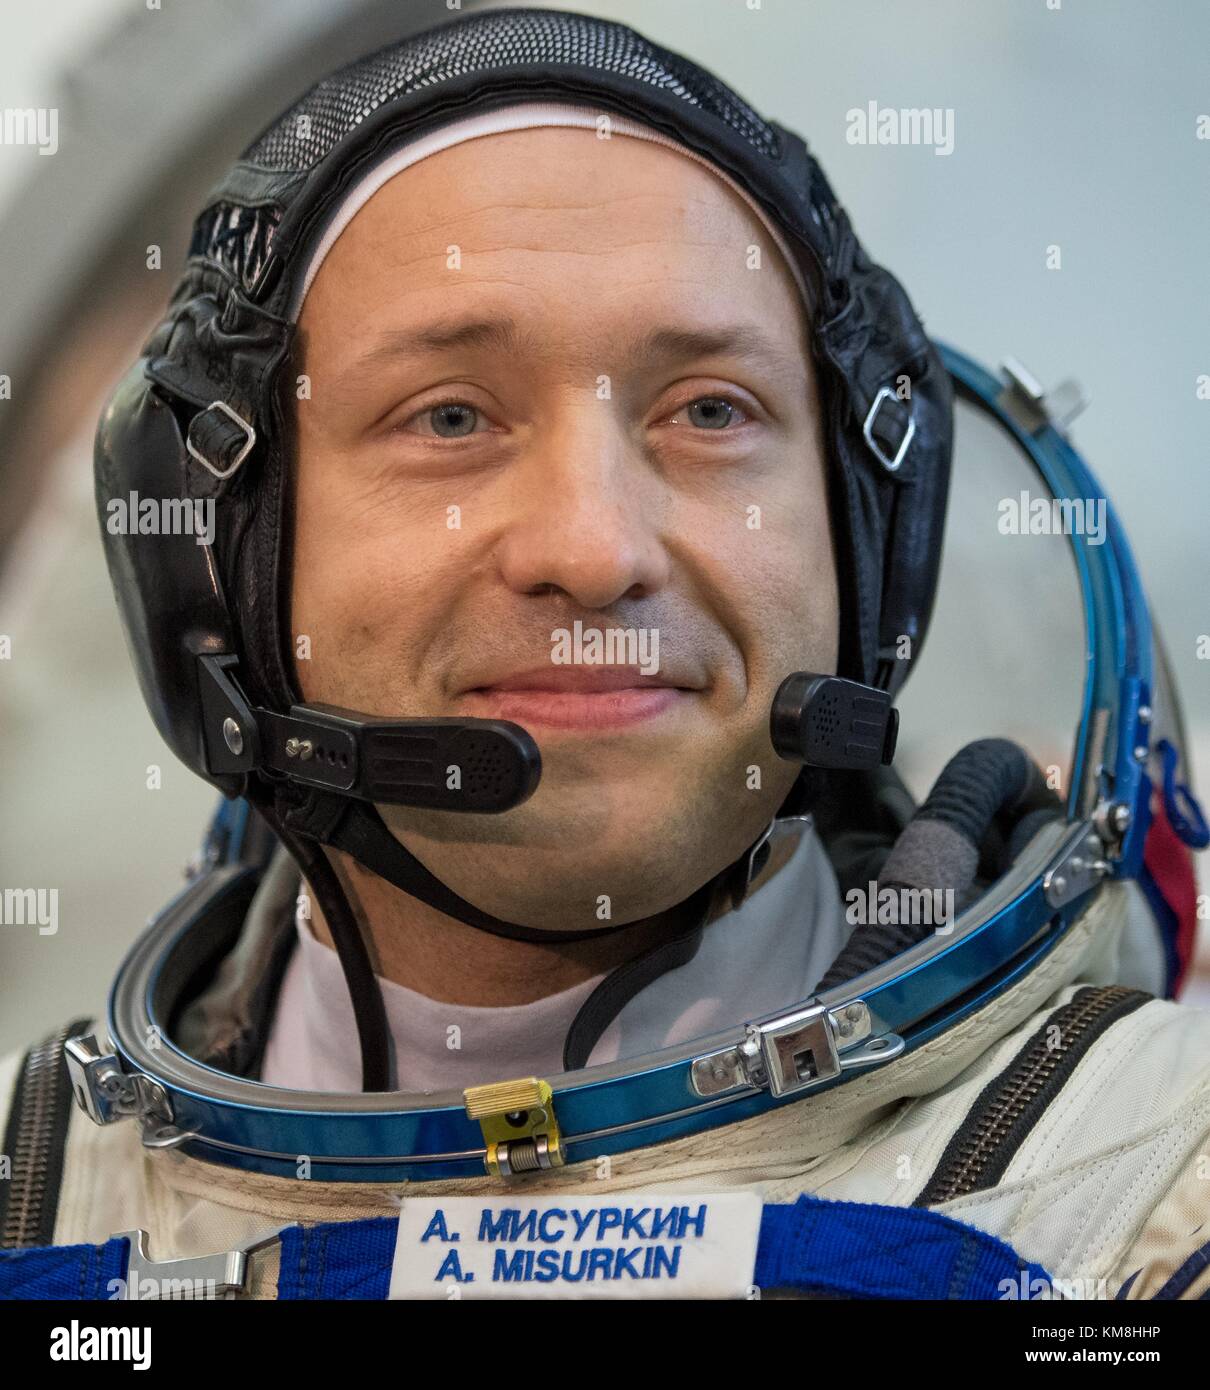 NASA International Space Station (ISS) Expedition 53 prime crew member Russian cosmonaut Alexander Misurkin of Roscosmos prepares for his Soyuz qualification exams outside the Soyuz simulator prior to the Soyuz MS-06 spacecraft launch at the Gagarin Cosmonaut Training Center August 31, 2017 in Star City, Russia.   (photo by Bill Ingalls  via Planetpix) Stock Photo